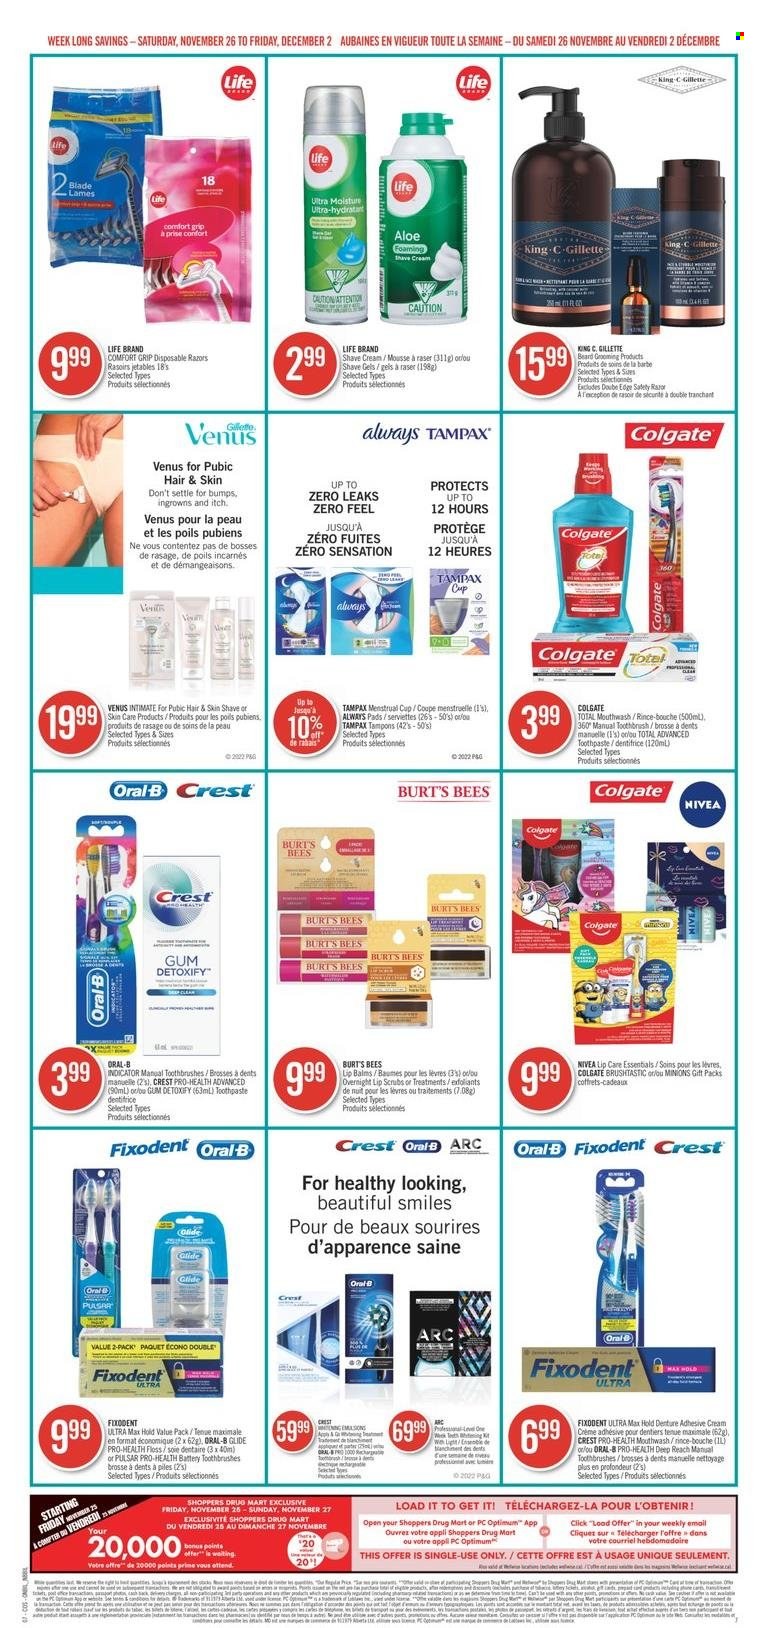 thumbnail - Shoppers Drug Mart Flyer - November 26, 2022 - December 02, 2022 - Sales products - Nivea, Minions, toothbrush, toothpaste, mouthwash, Fixodent, Crest, Always pads, tampons, Gillette, razor, Venus, shave cream, disposable razor, pot, cup, battery, Optimum, Colgate, Tampax, Oral-B. Page 12.